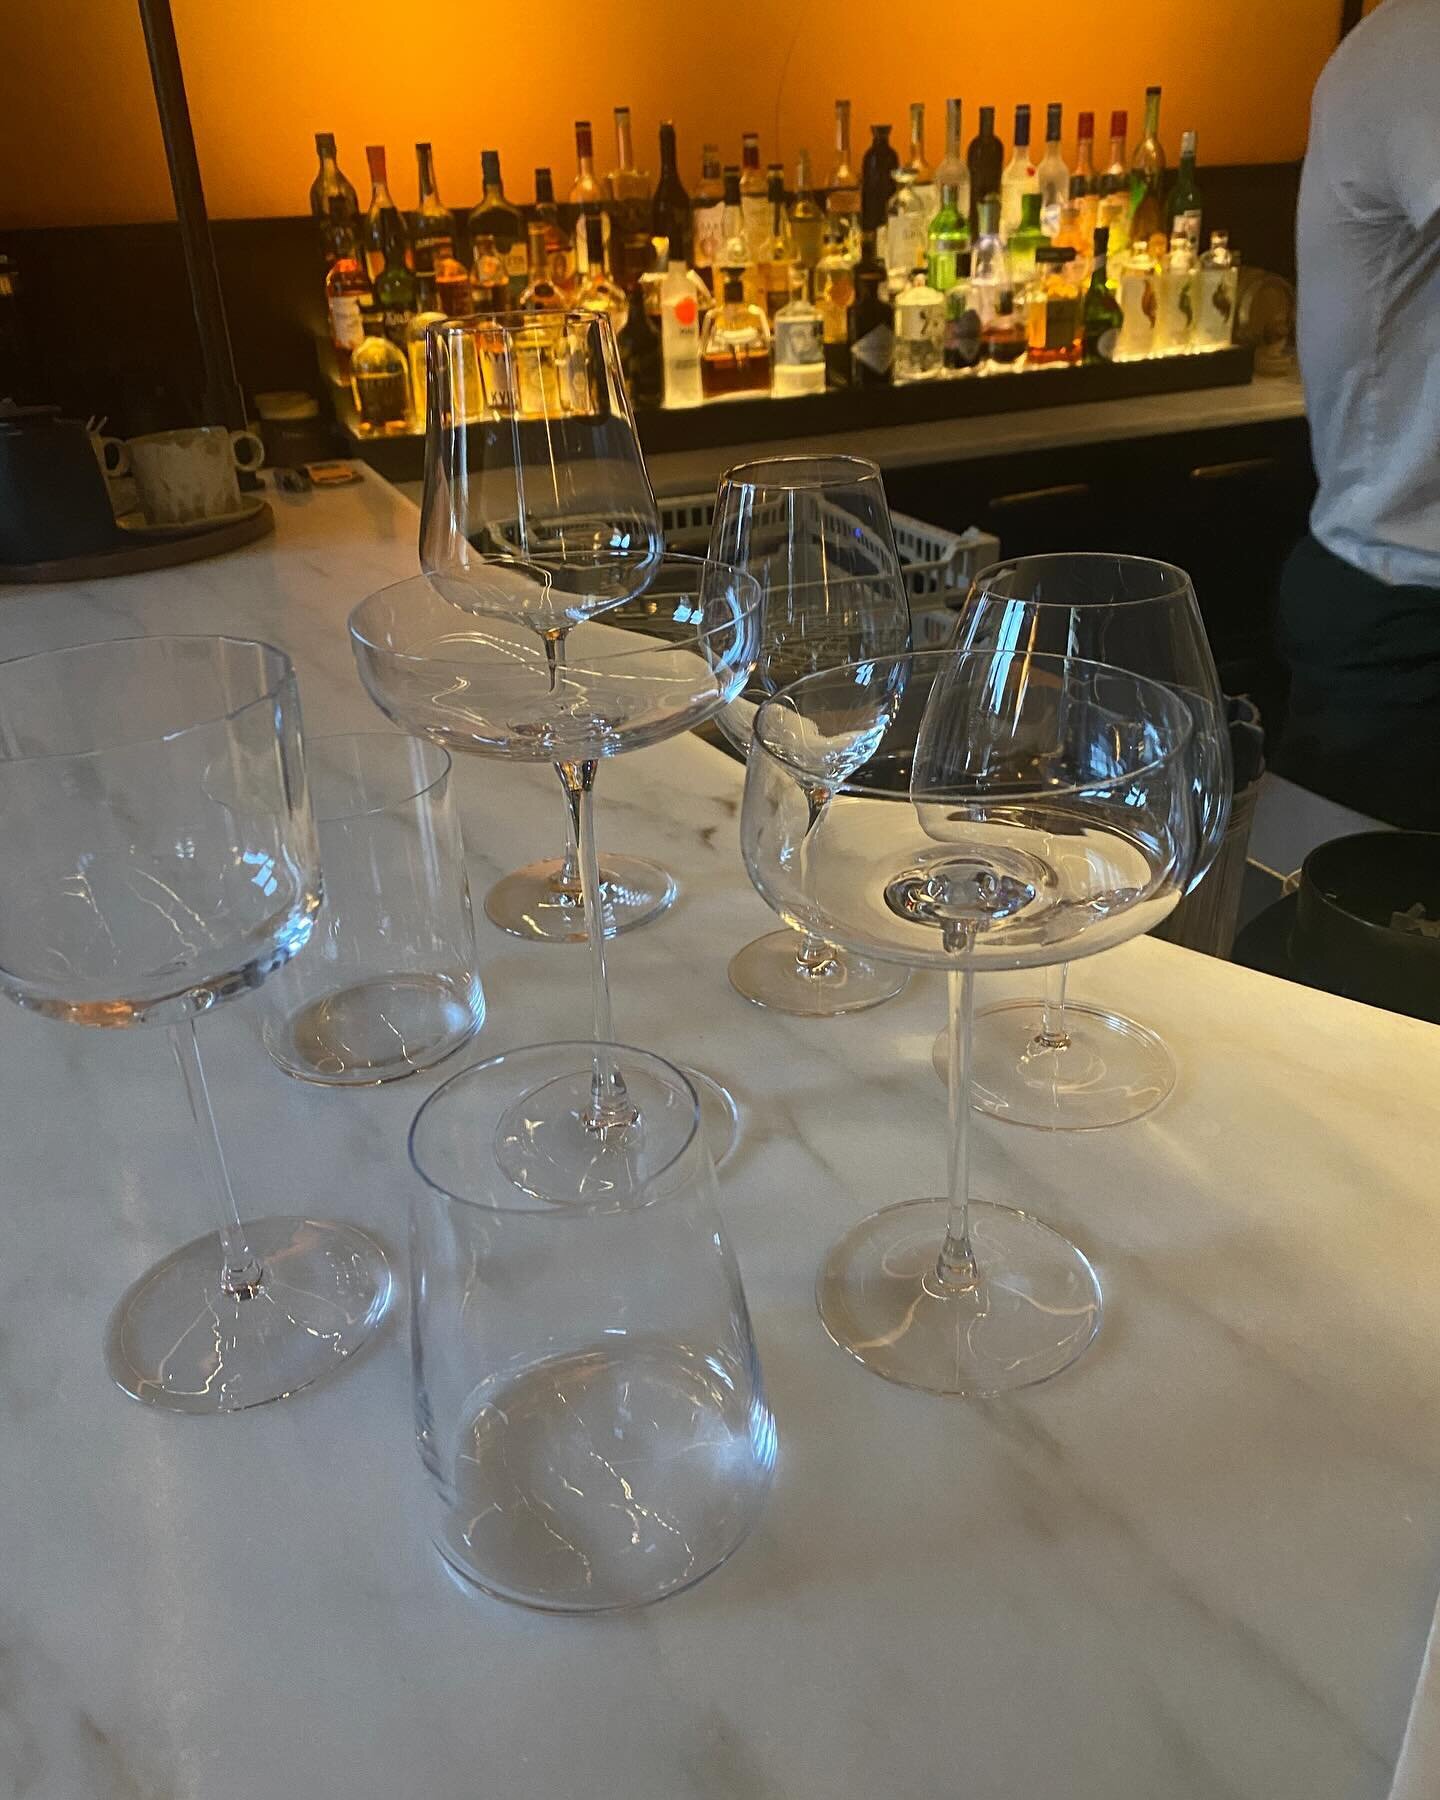 New in Porto &hellip; 
@cozinhadasfloresporto by @nunoviajante &hellip; ❤️ the bar and its glass ware. Looking forward to coming back in October and to having the full dining experience. 

#finedining #casualfine #greatwines